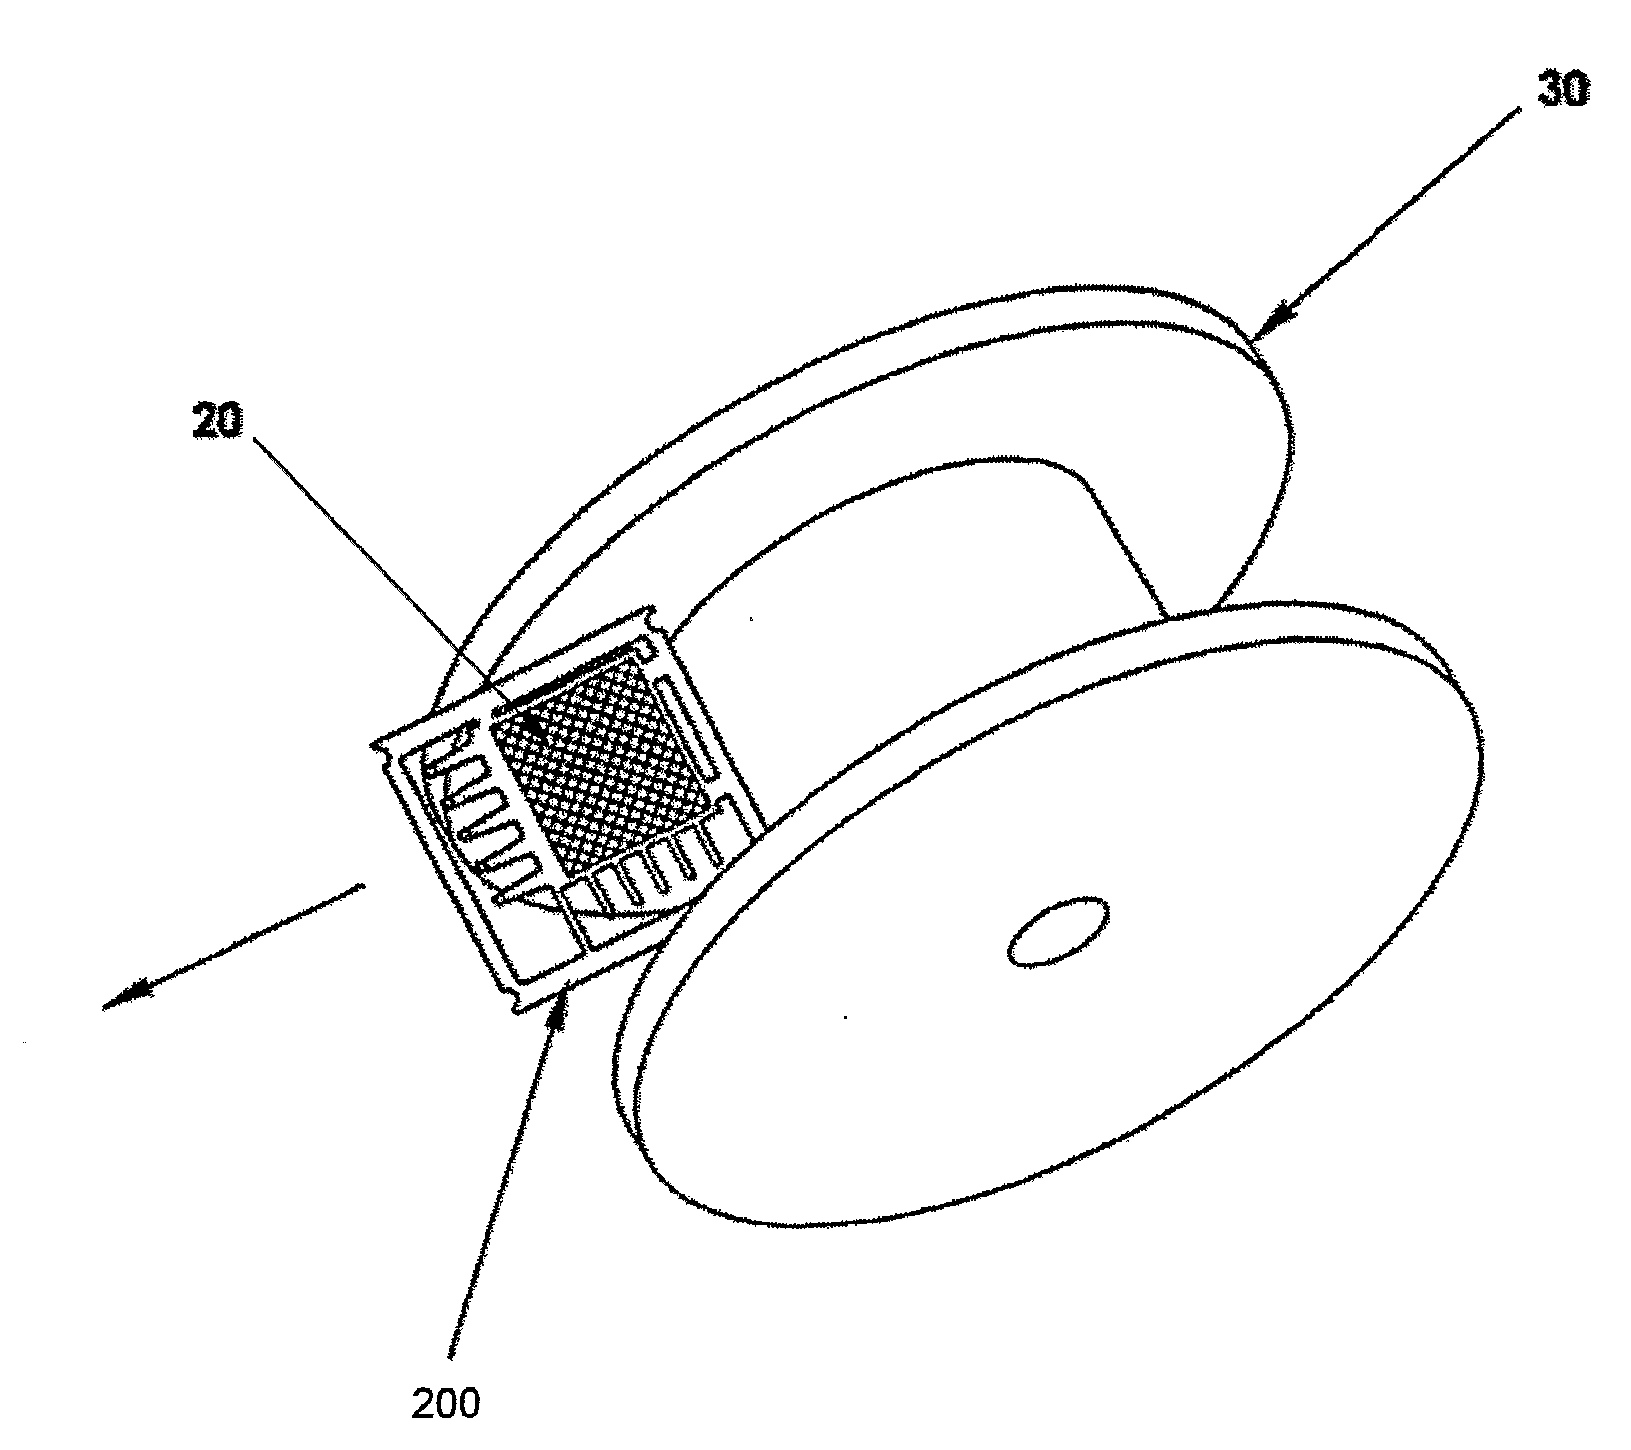 High Density Interconnection Device With Dielectric Coating